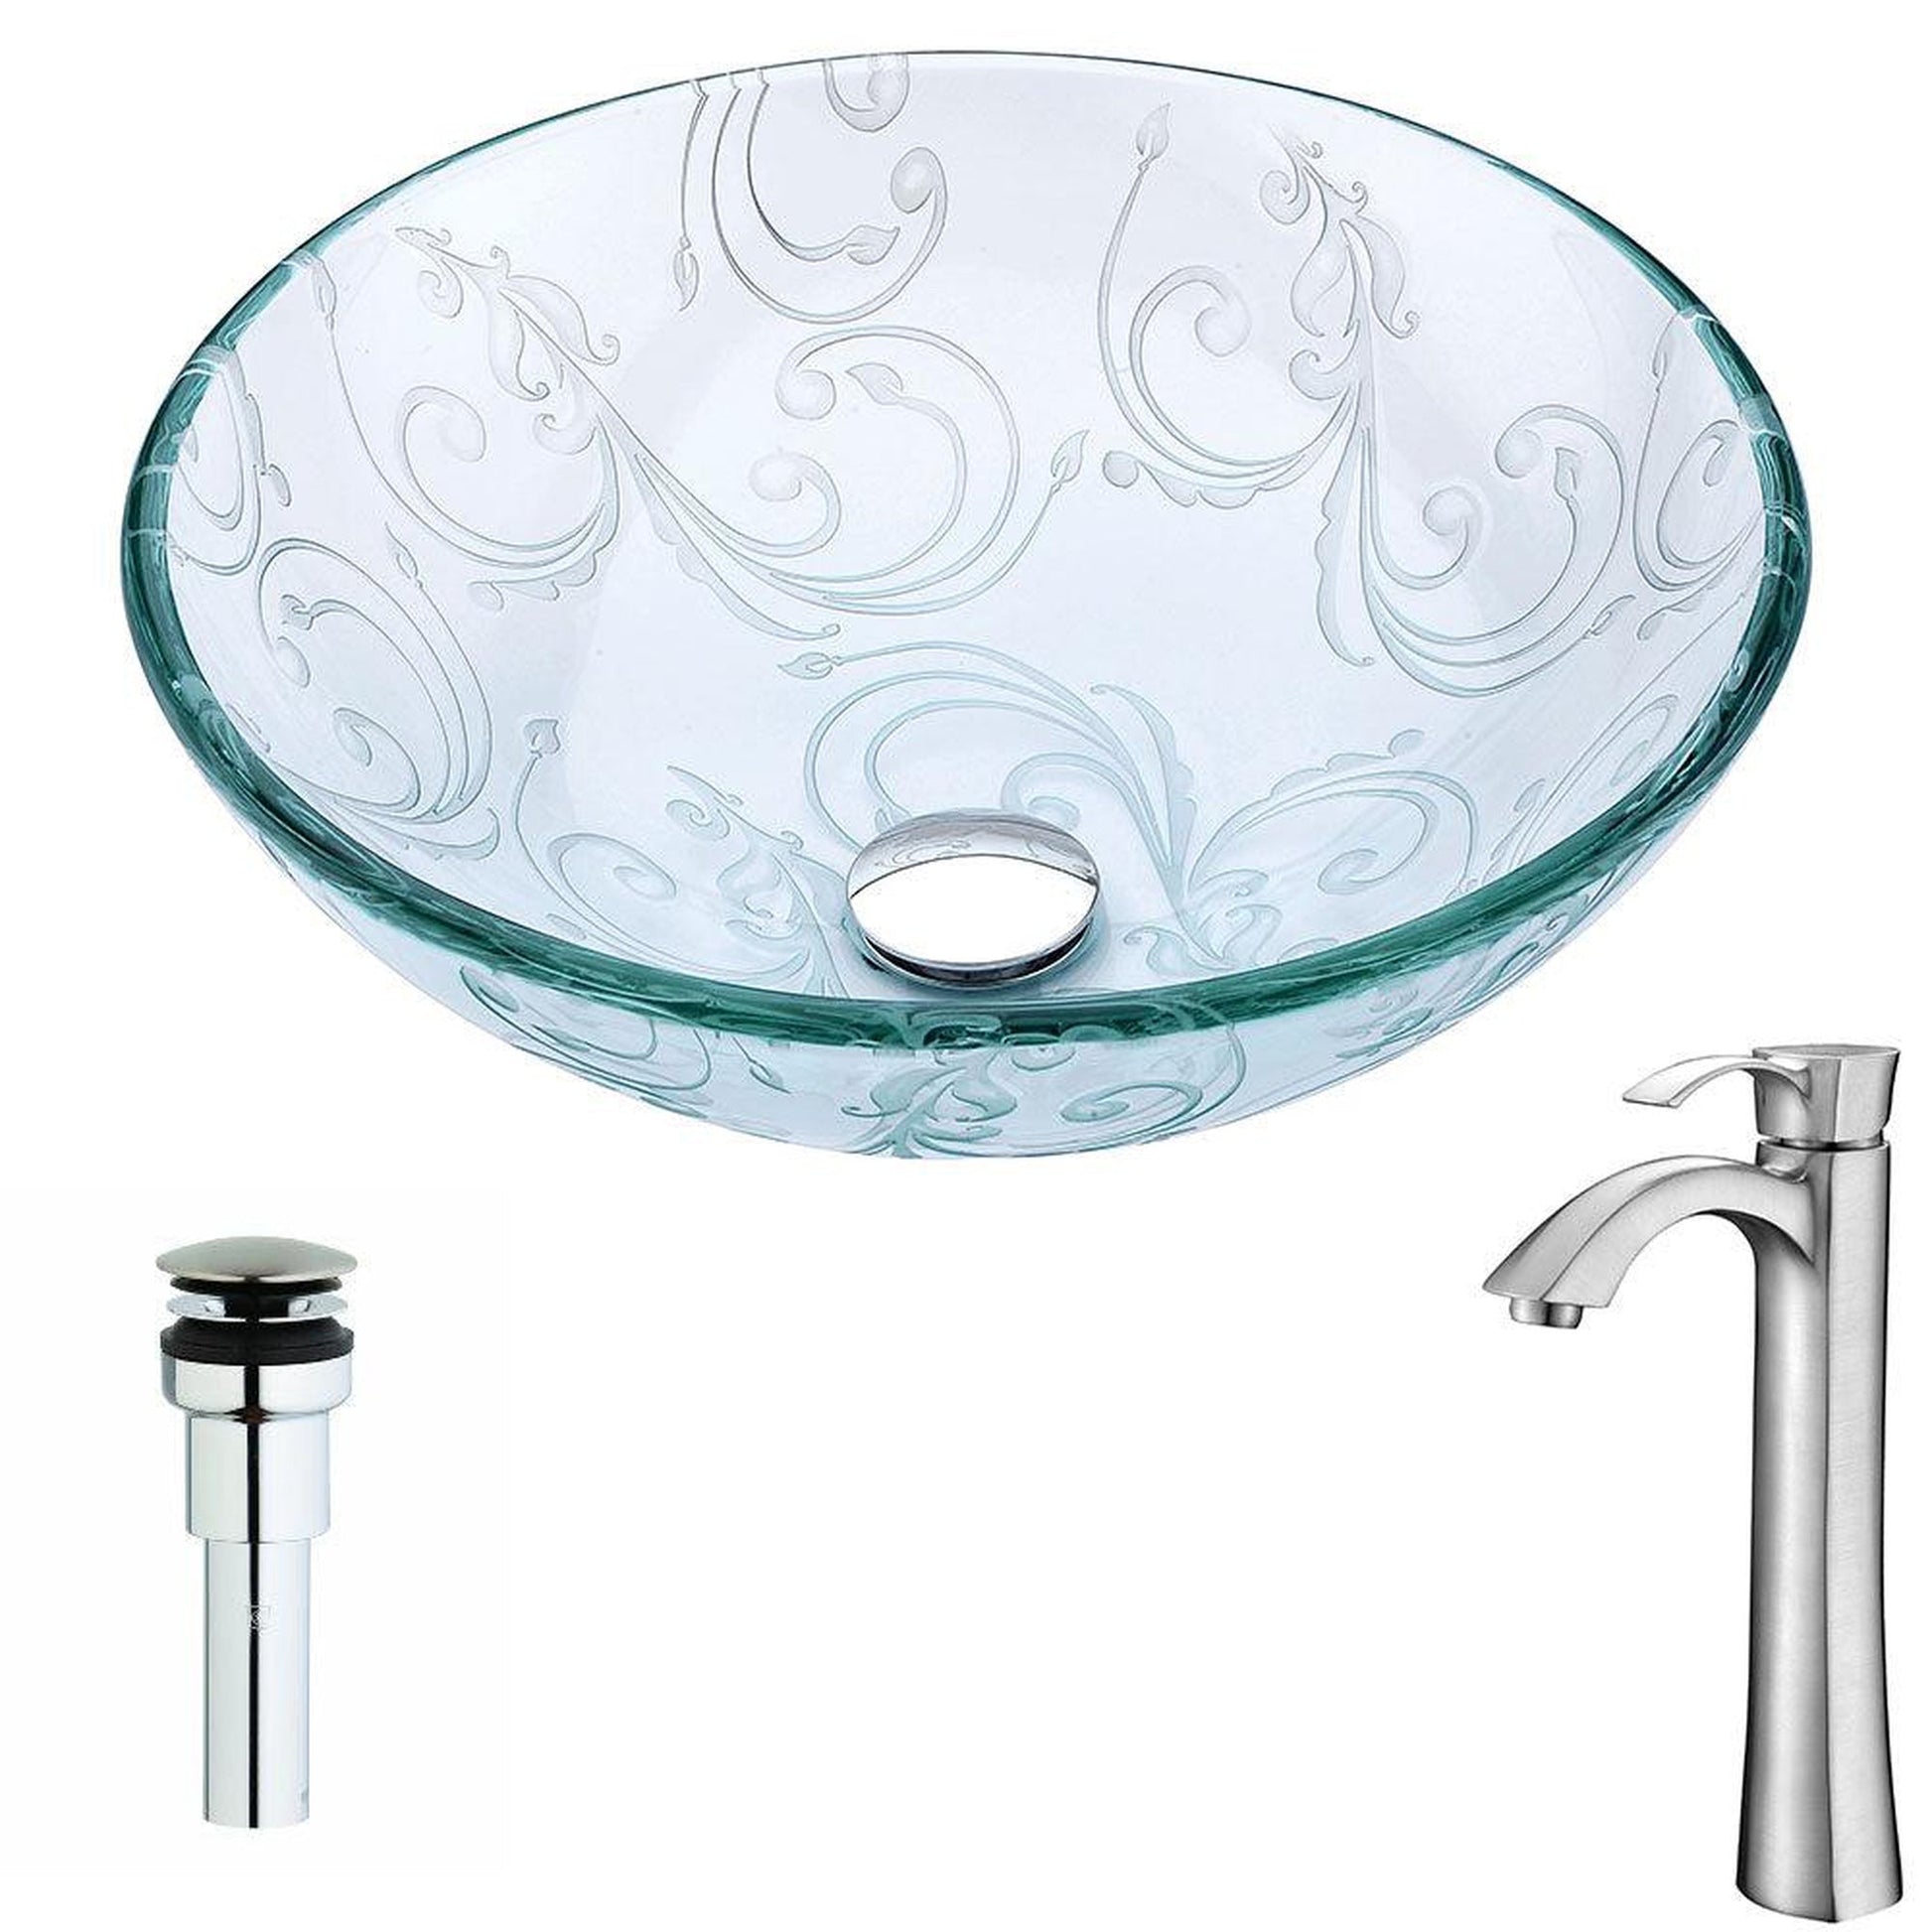 ANZZI Vieno Series 17" x 17" Round Crystal Clear Floral Deco-Glass Vessel Sink With Chrome Pop-Up Drain and Brushed Nickel Harmony Faucet